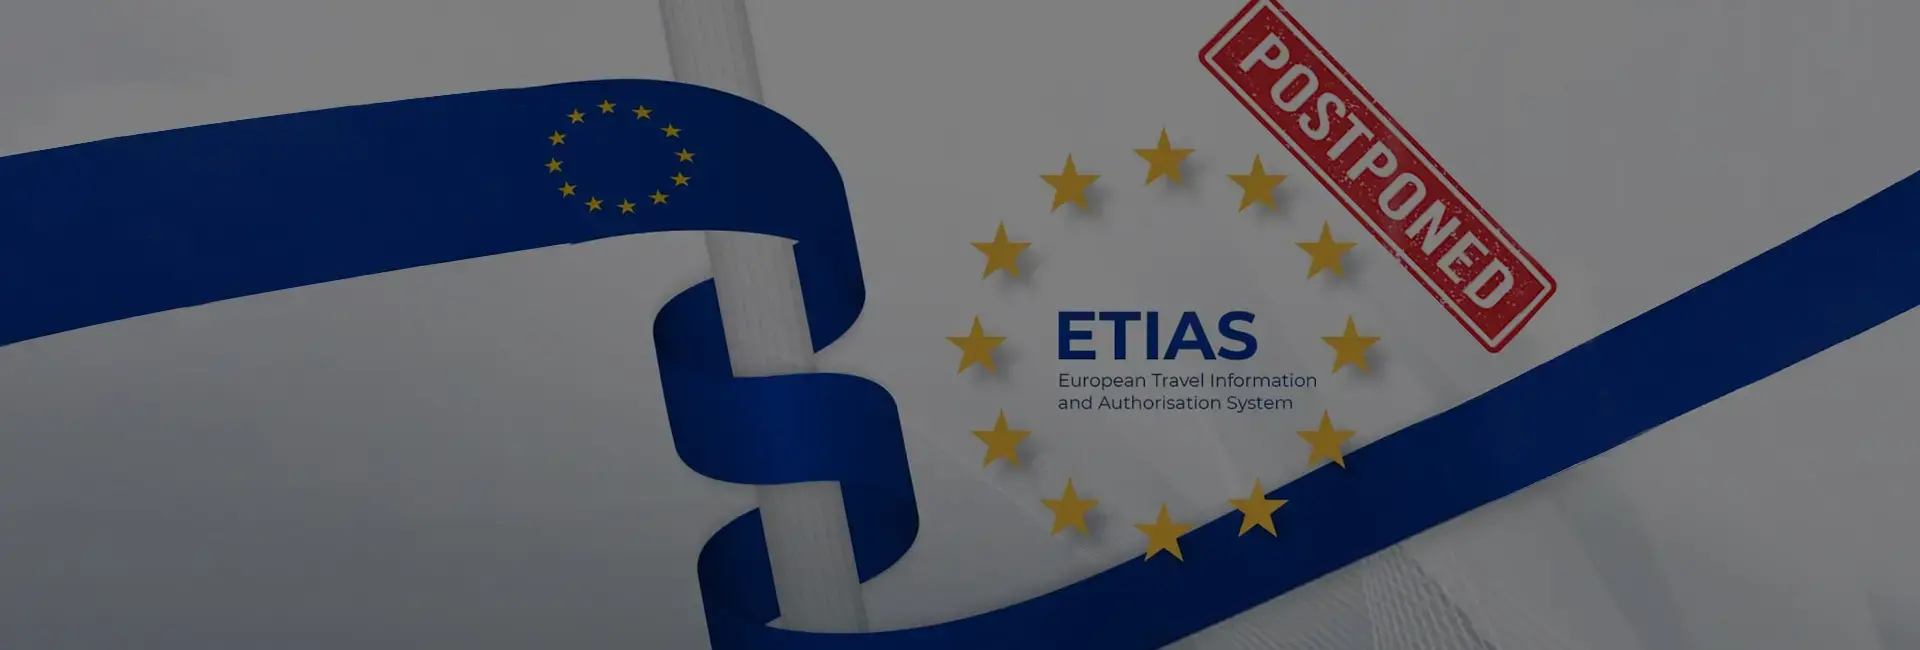 IEU Once Again Postpones Implementation of ETIAS - ISS Relocations